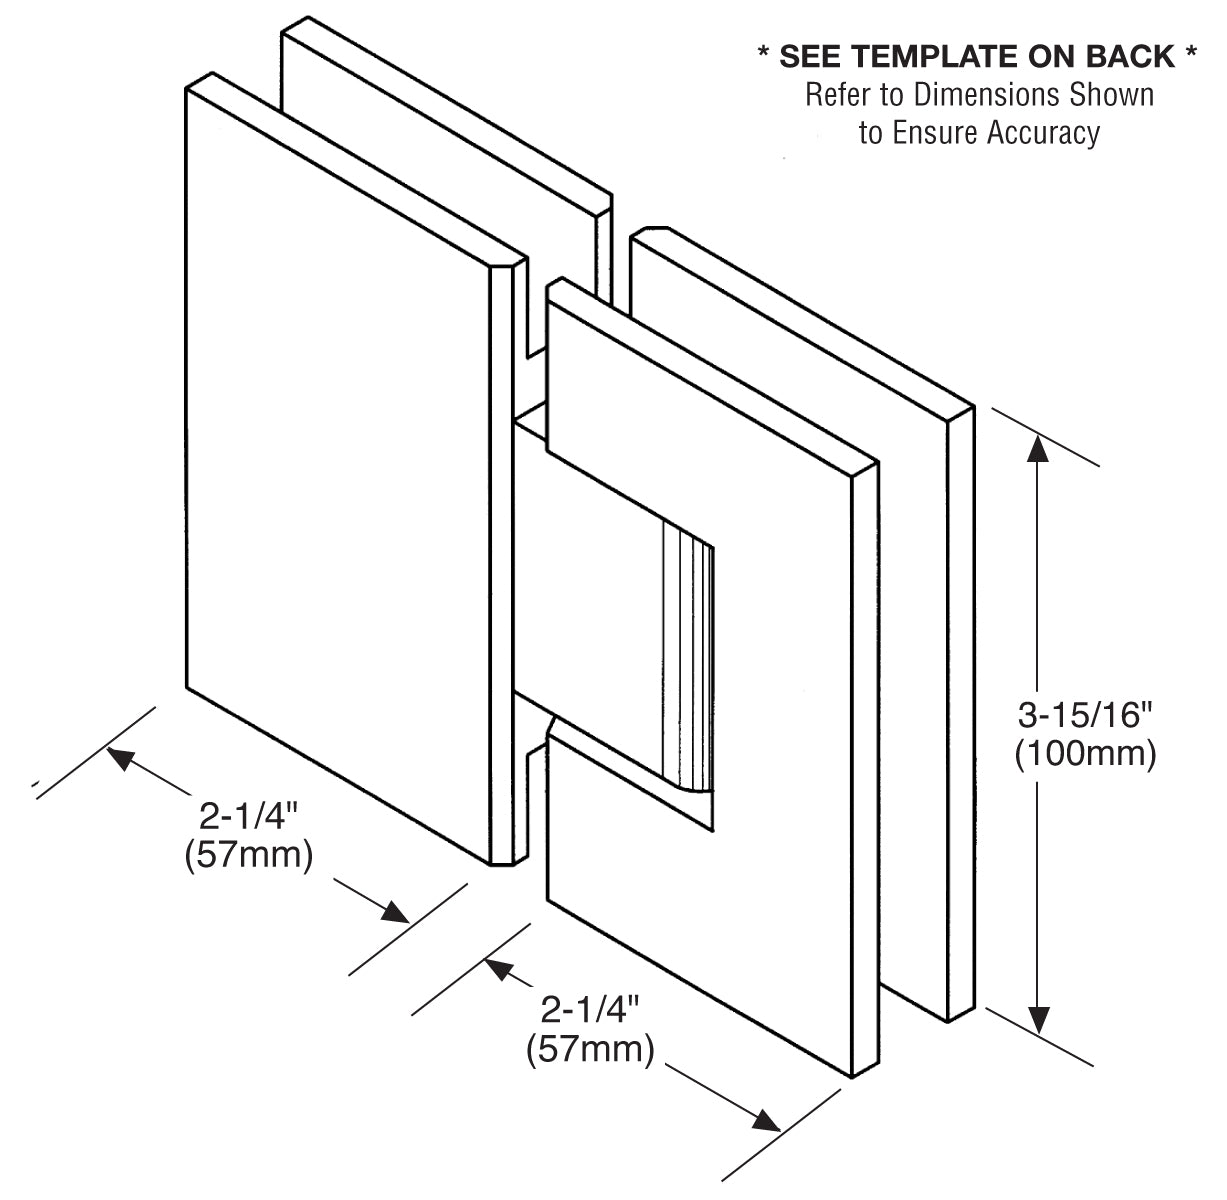 Vienna 580 Series Glass-to-Glass Hinge with Internal 5 Degree Pin